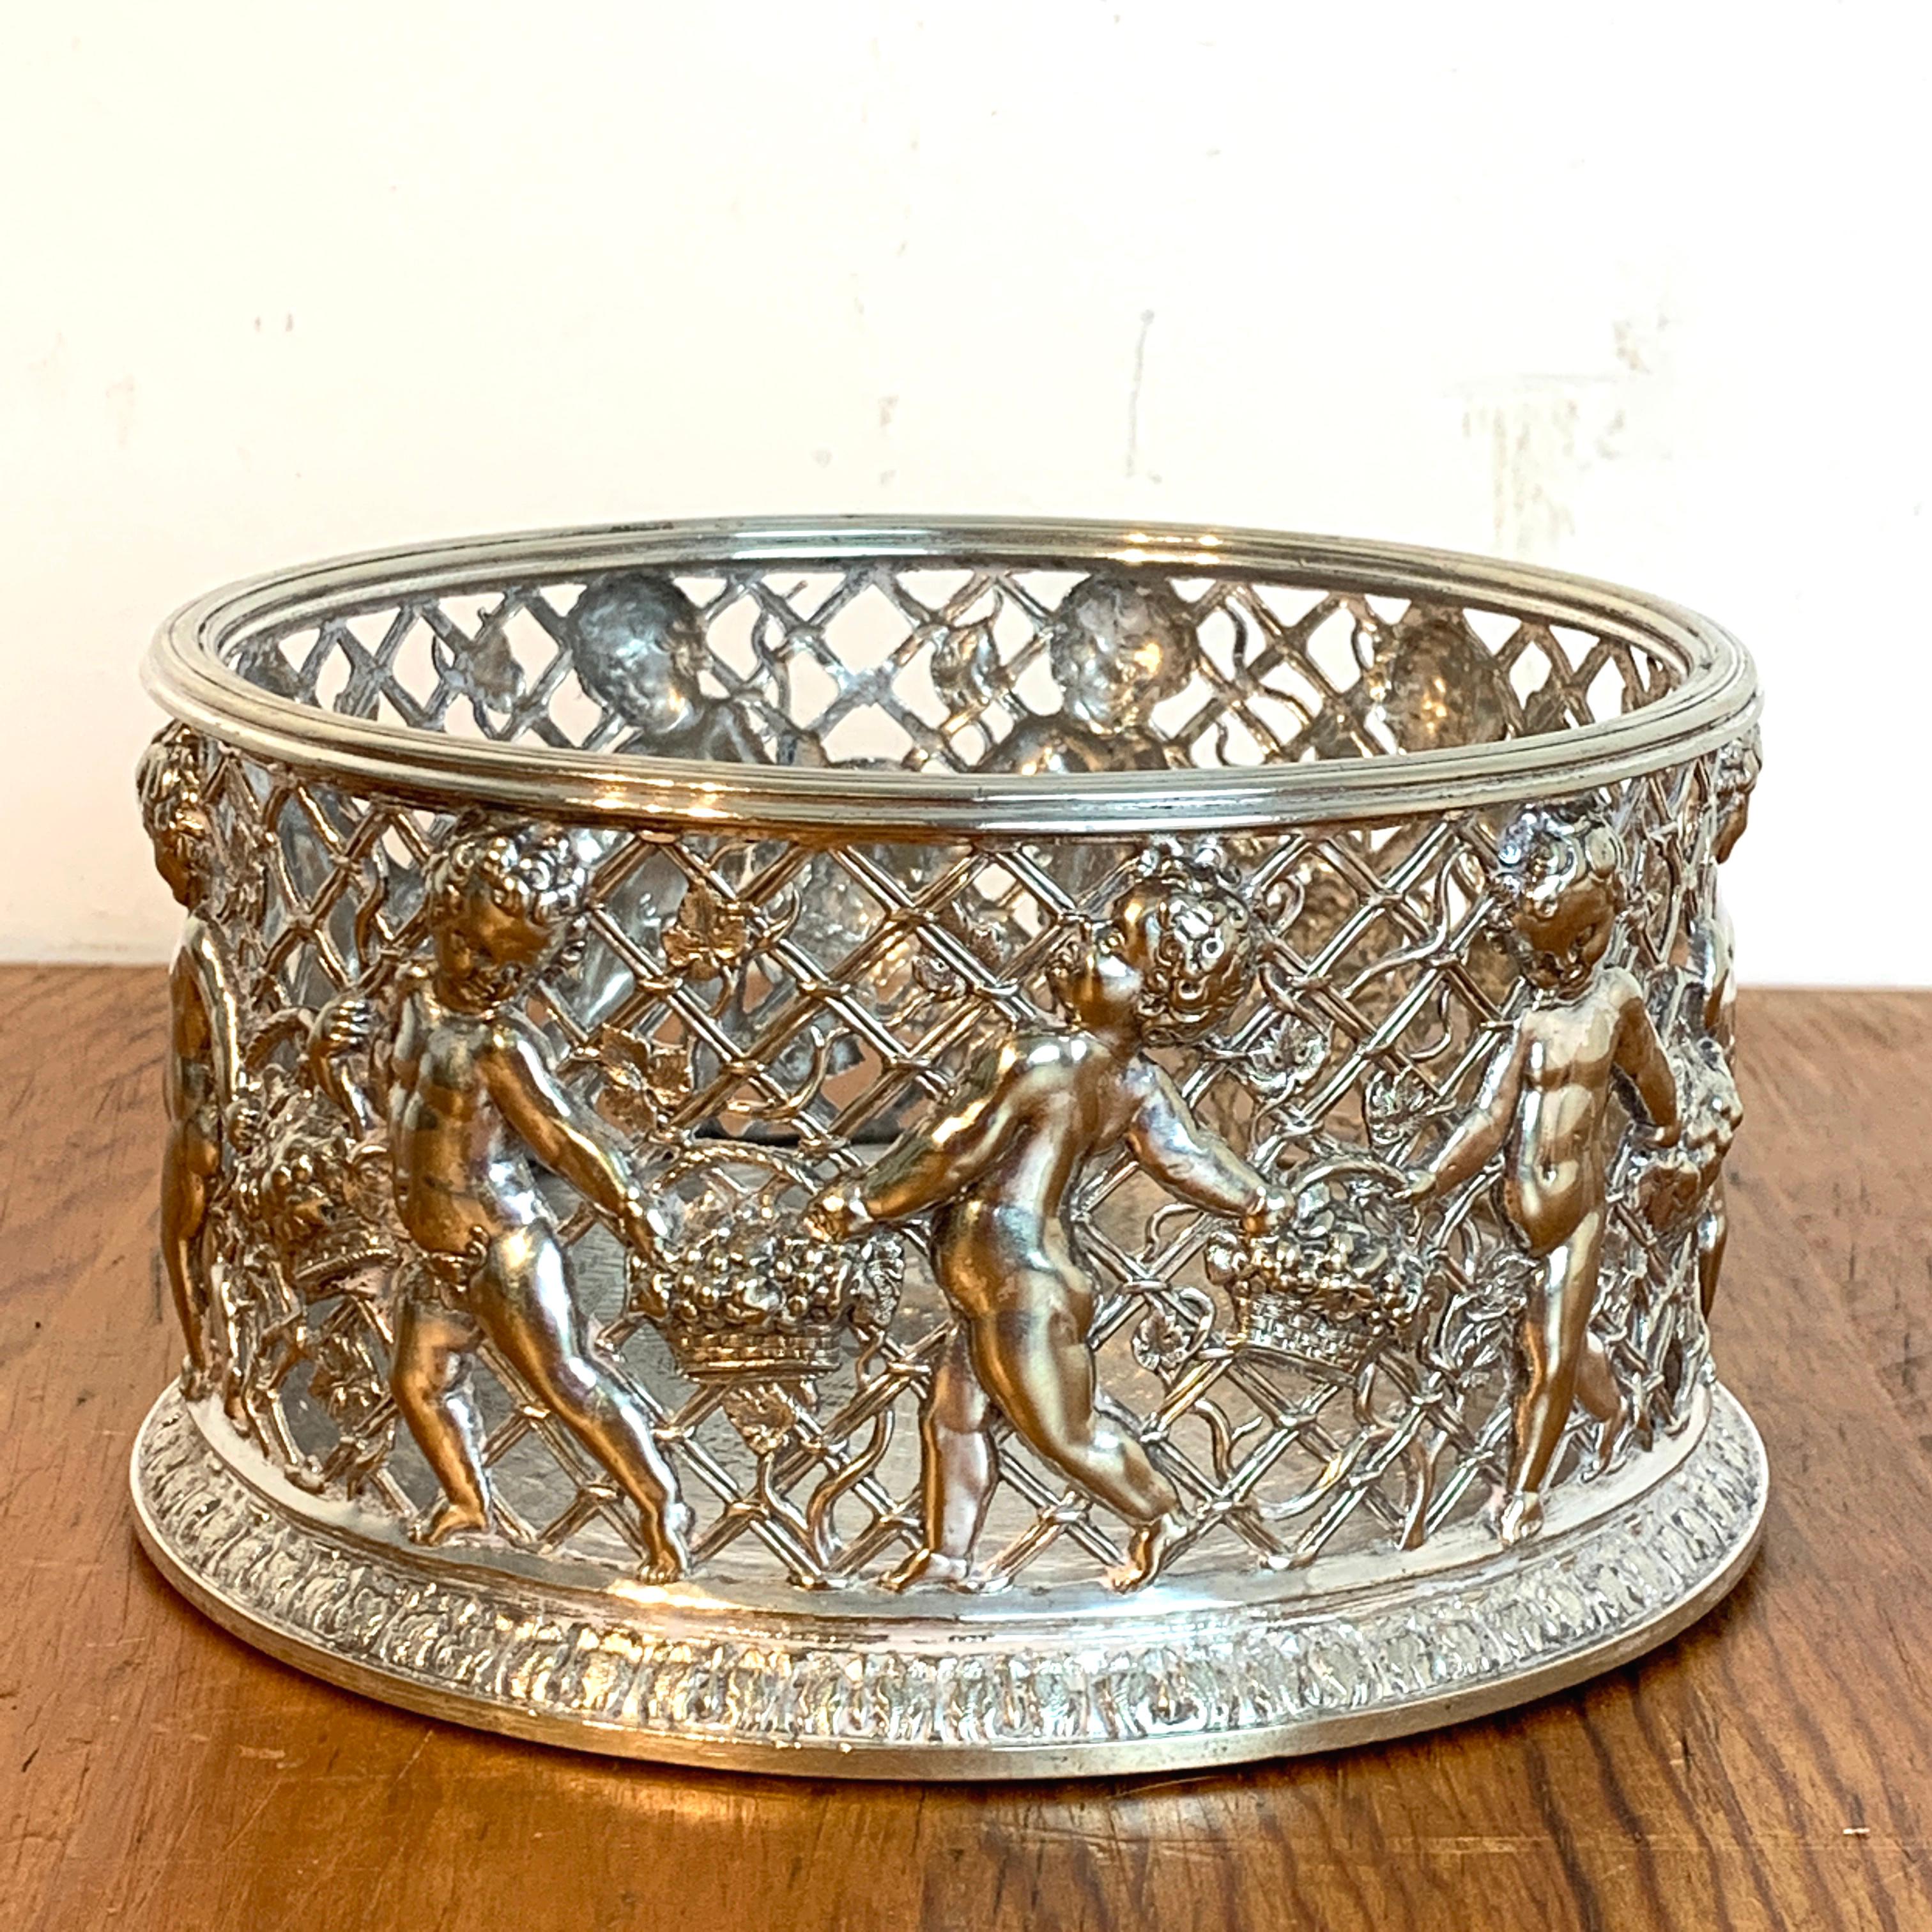 Magnificent English Silver Plated Putti Motif Large Wine Coaster, Elkington In Good Condition For Sale In West Palm Beach, FL